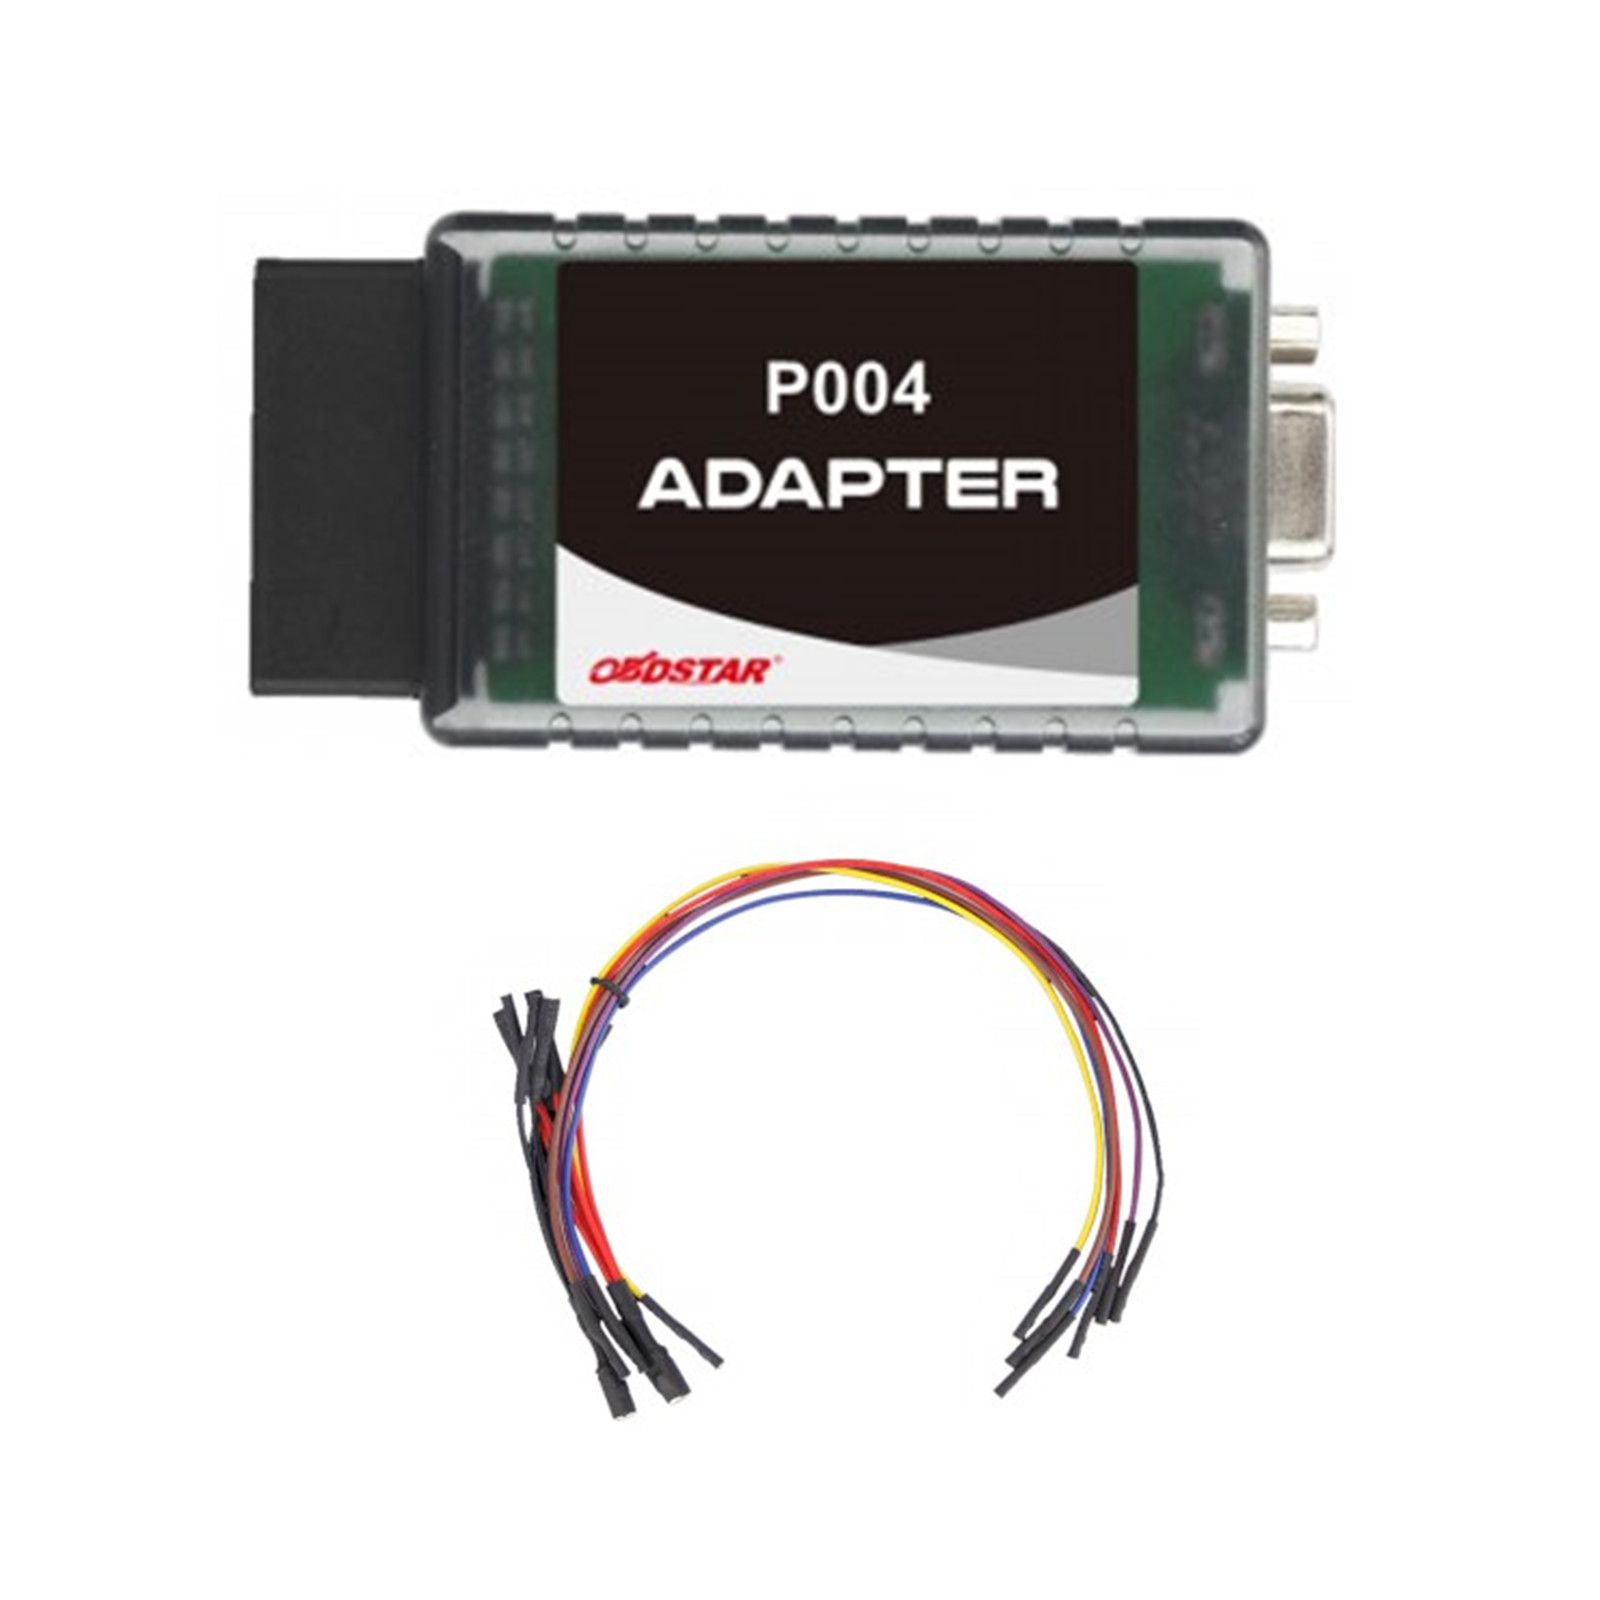 OBDSTAR AIRBAG RESET KIT P004 Adapter + P004 Jumper Working With OBDSTAR X300 DP Plus/Odo master/P50 for Airbag Reset